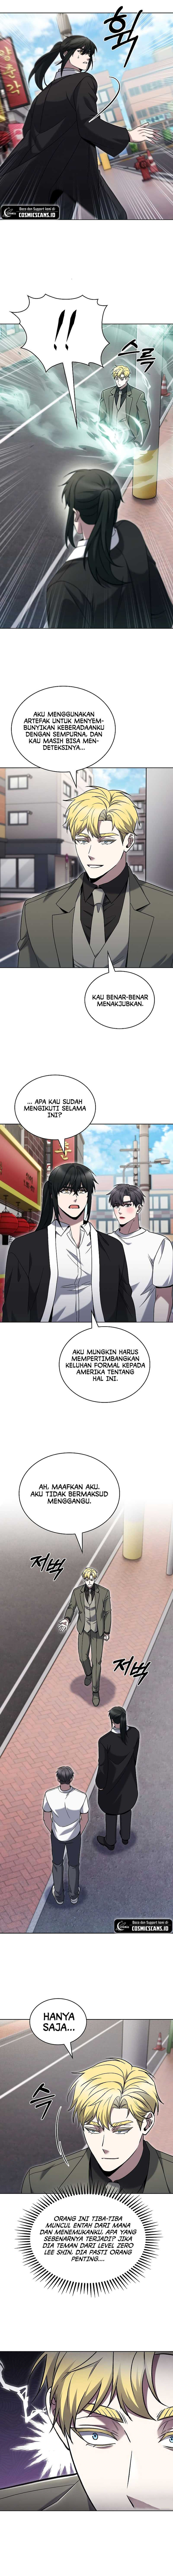 The Delivery Man From Murim Chapter 37 - 85